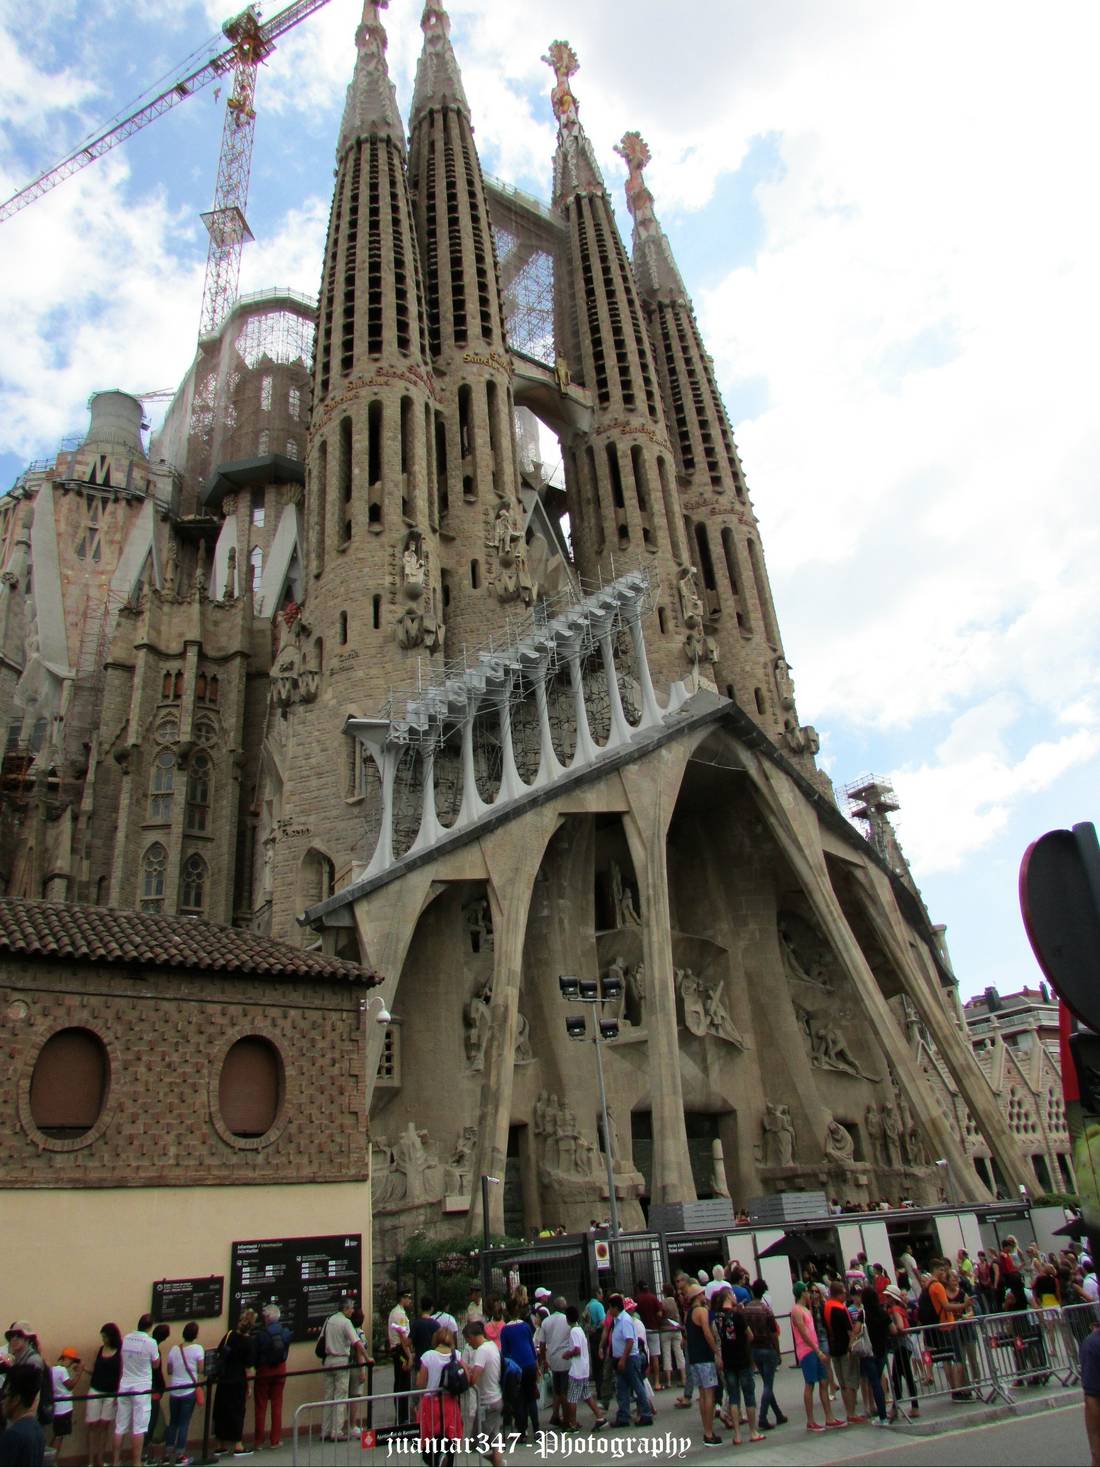 Panoramic view of the Sagrada Familia (Holy Family), by Gaudí